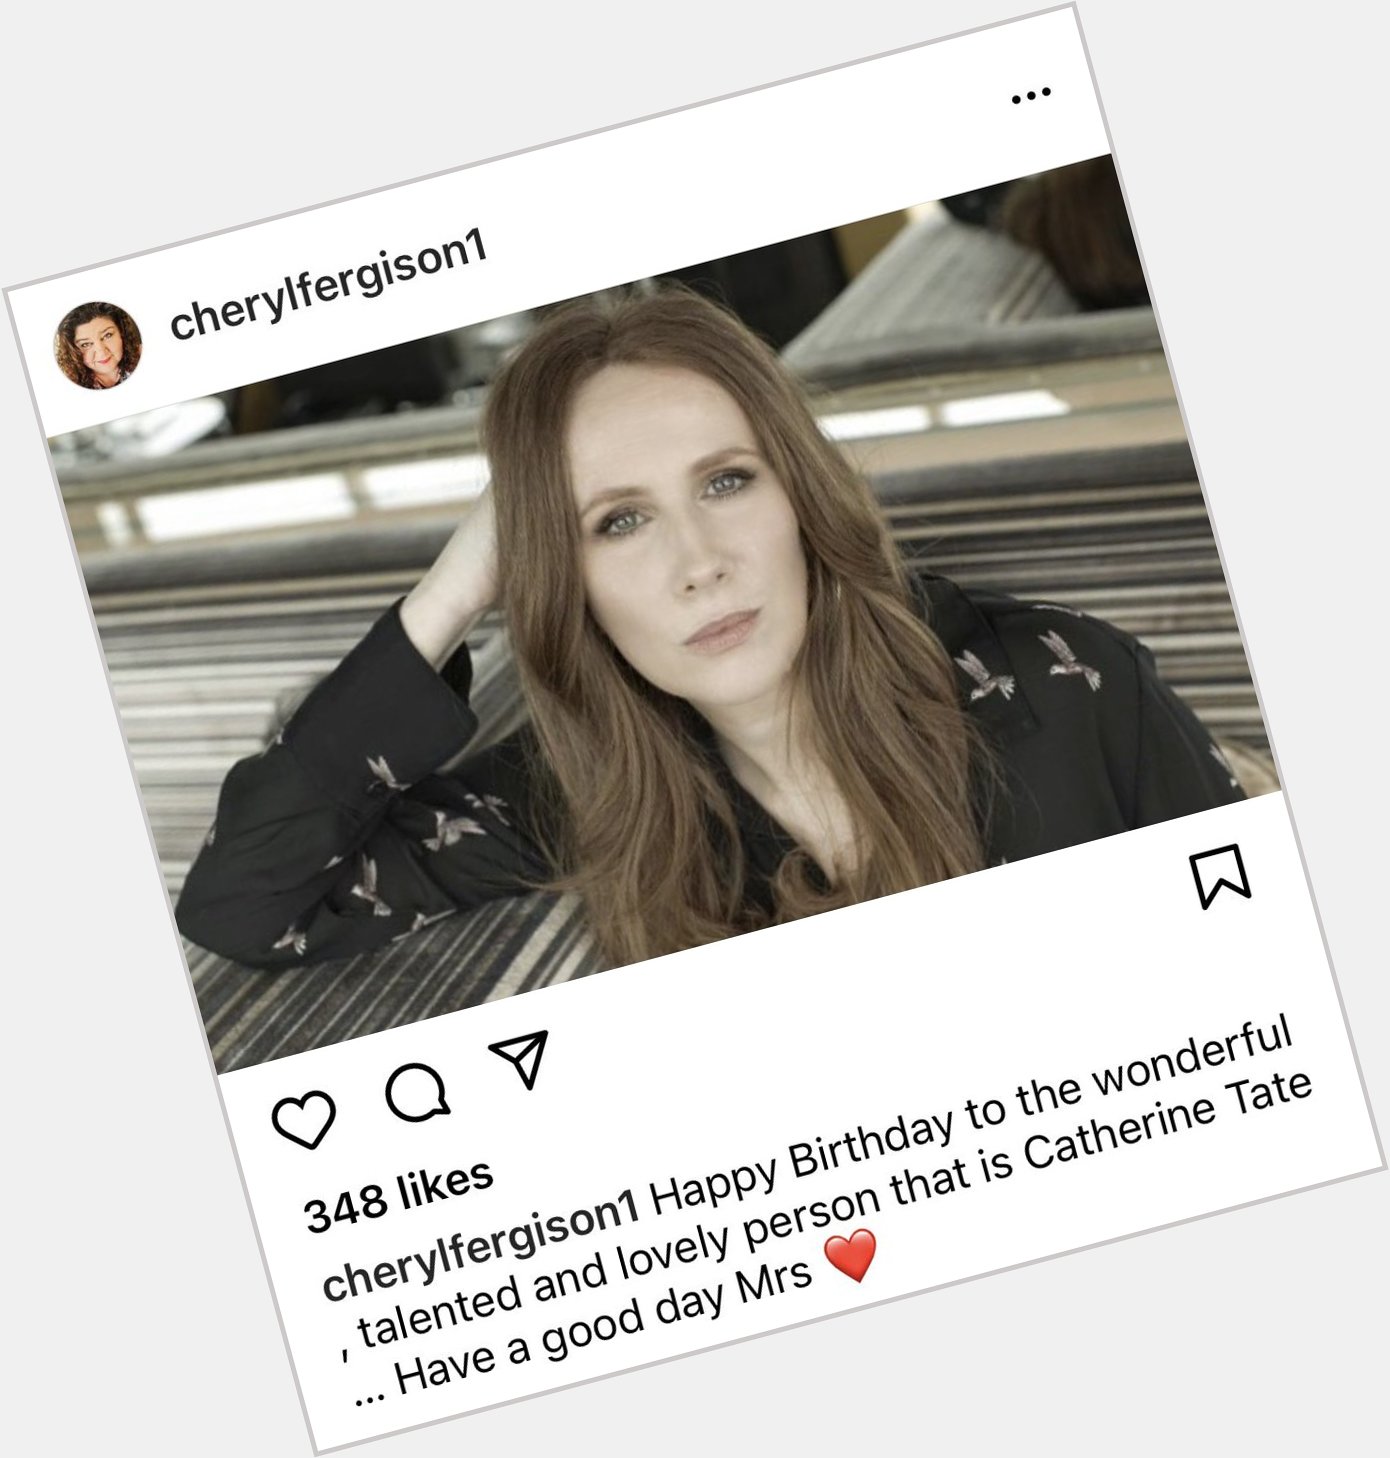 Obsessed with Cheryl Fergison wishing Catherine Tate a happy birthday 7 months early 